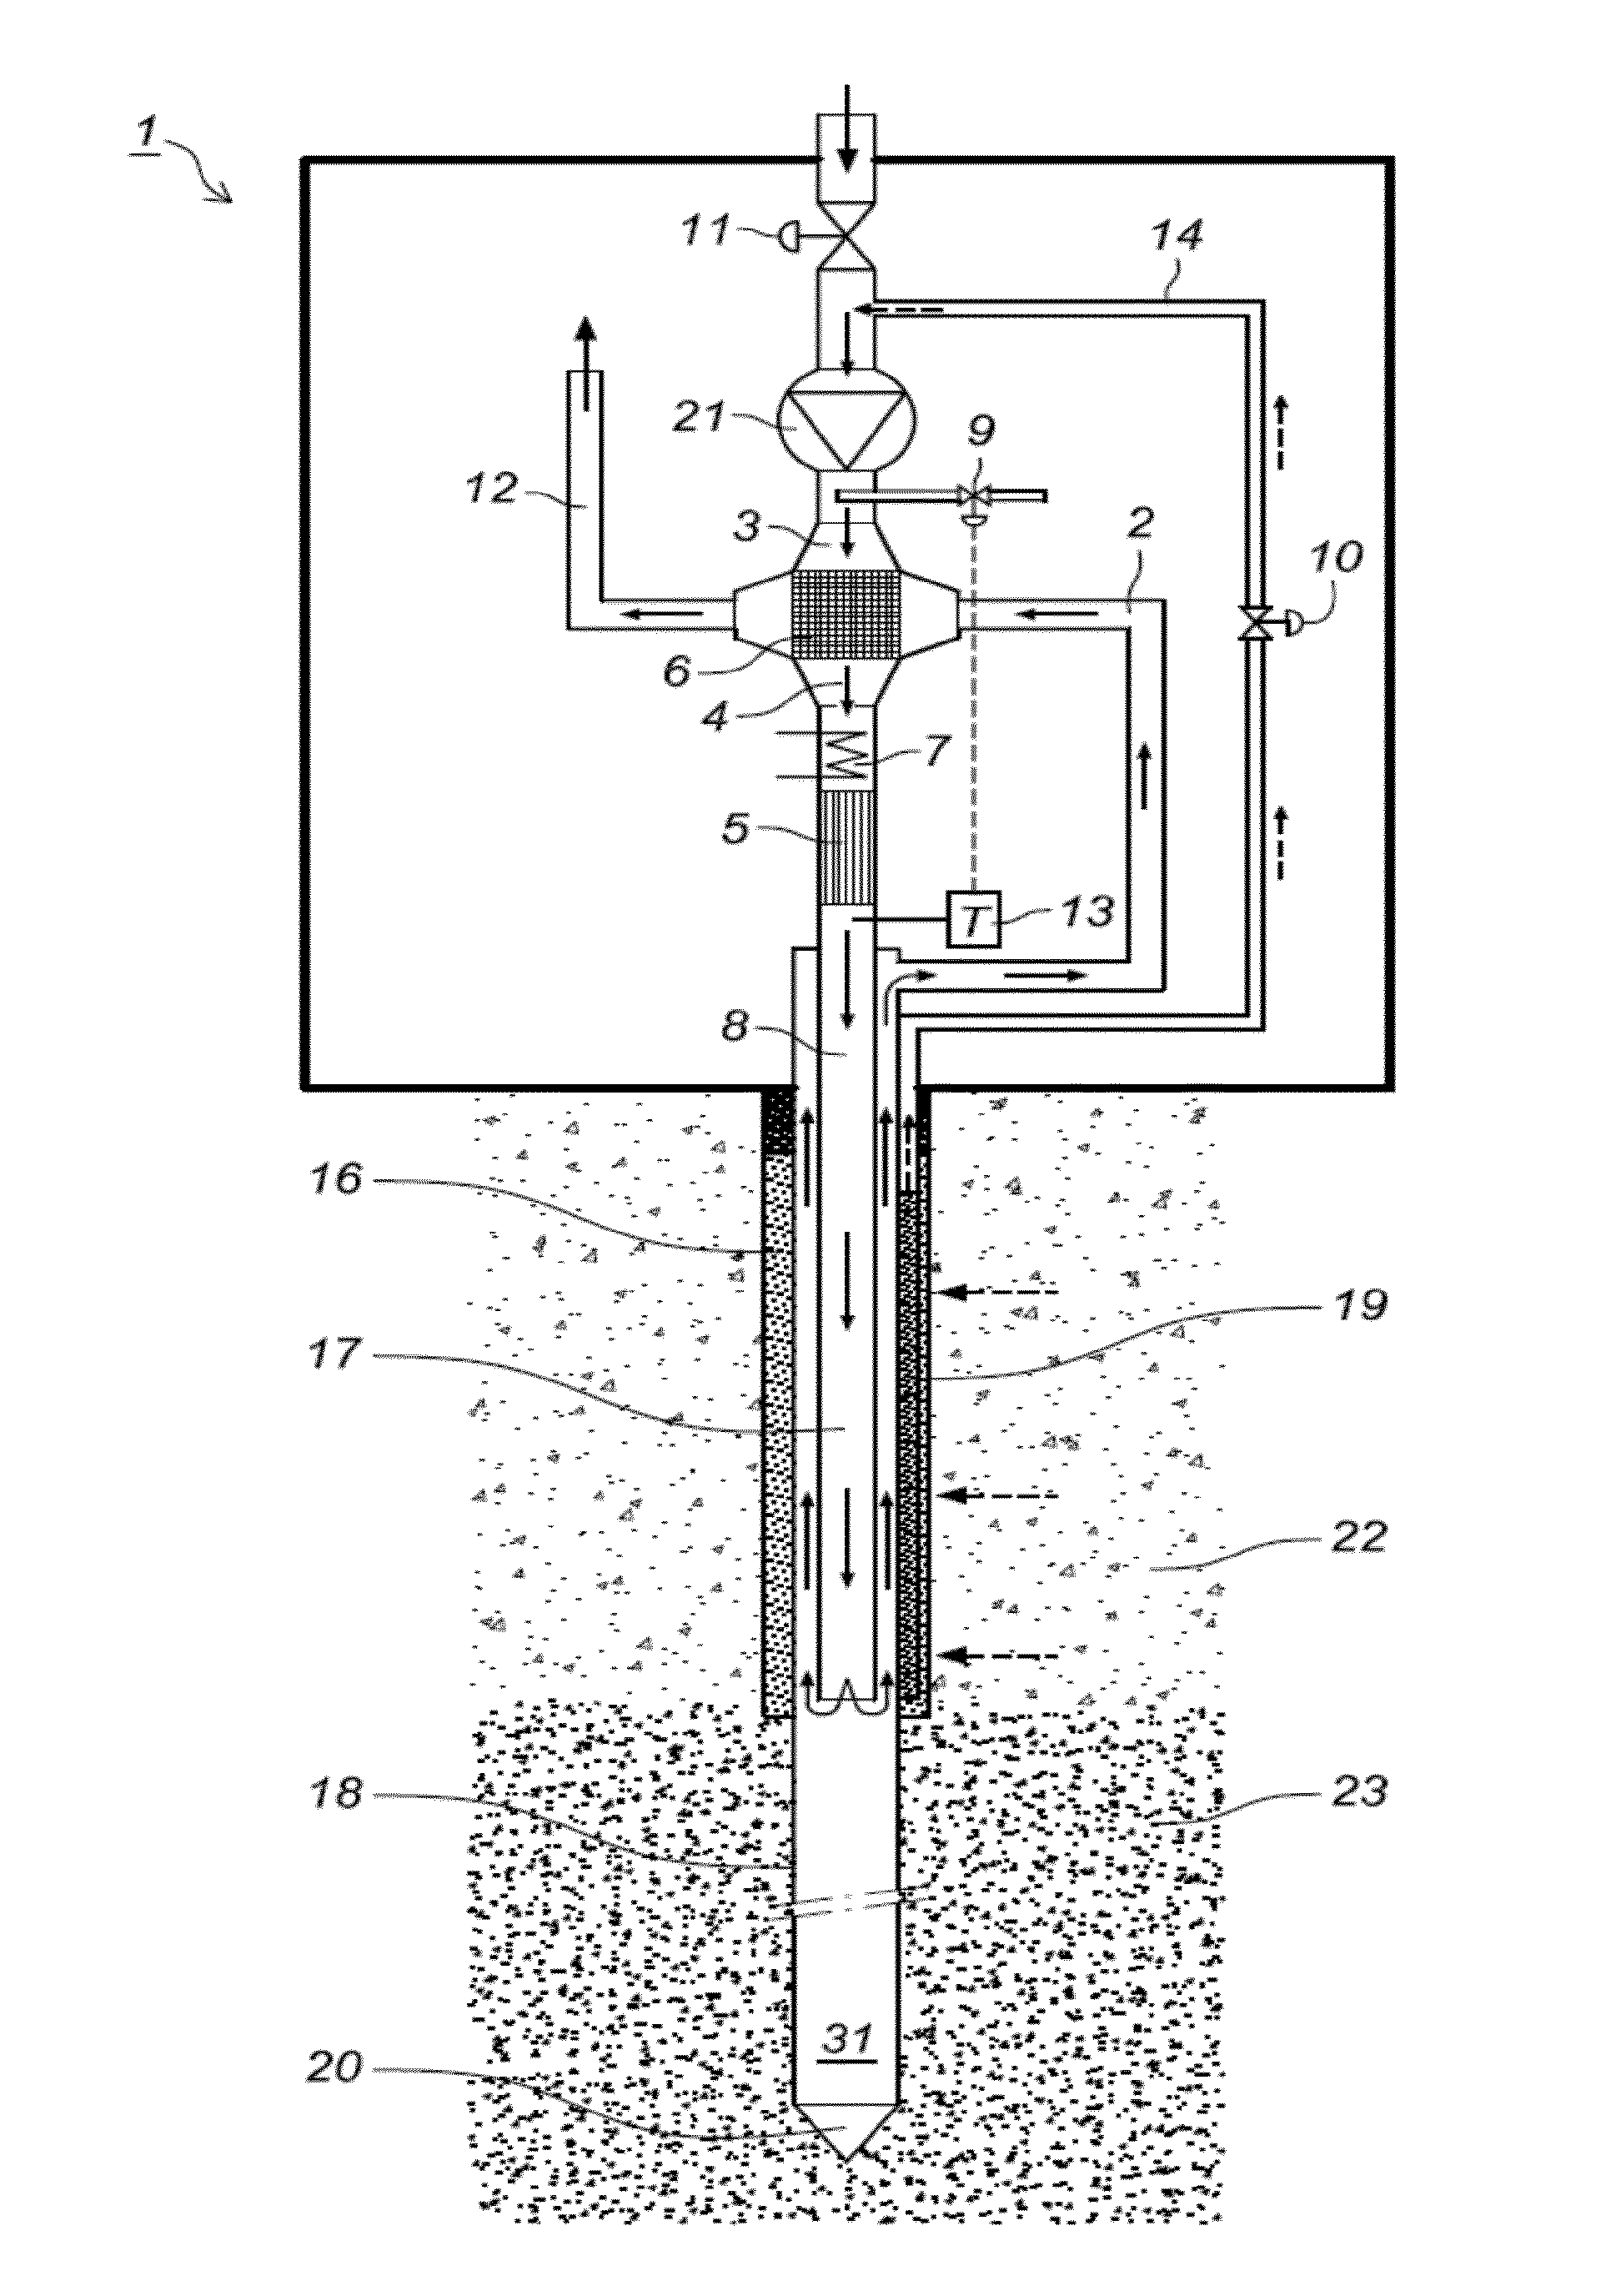 Devices and methods for soil remediation